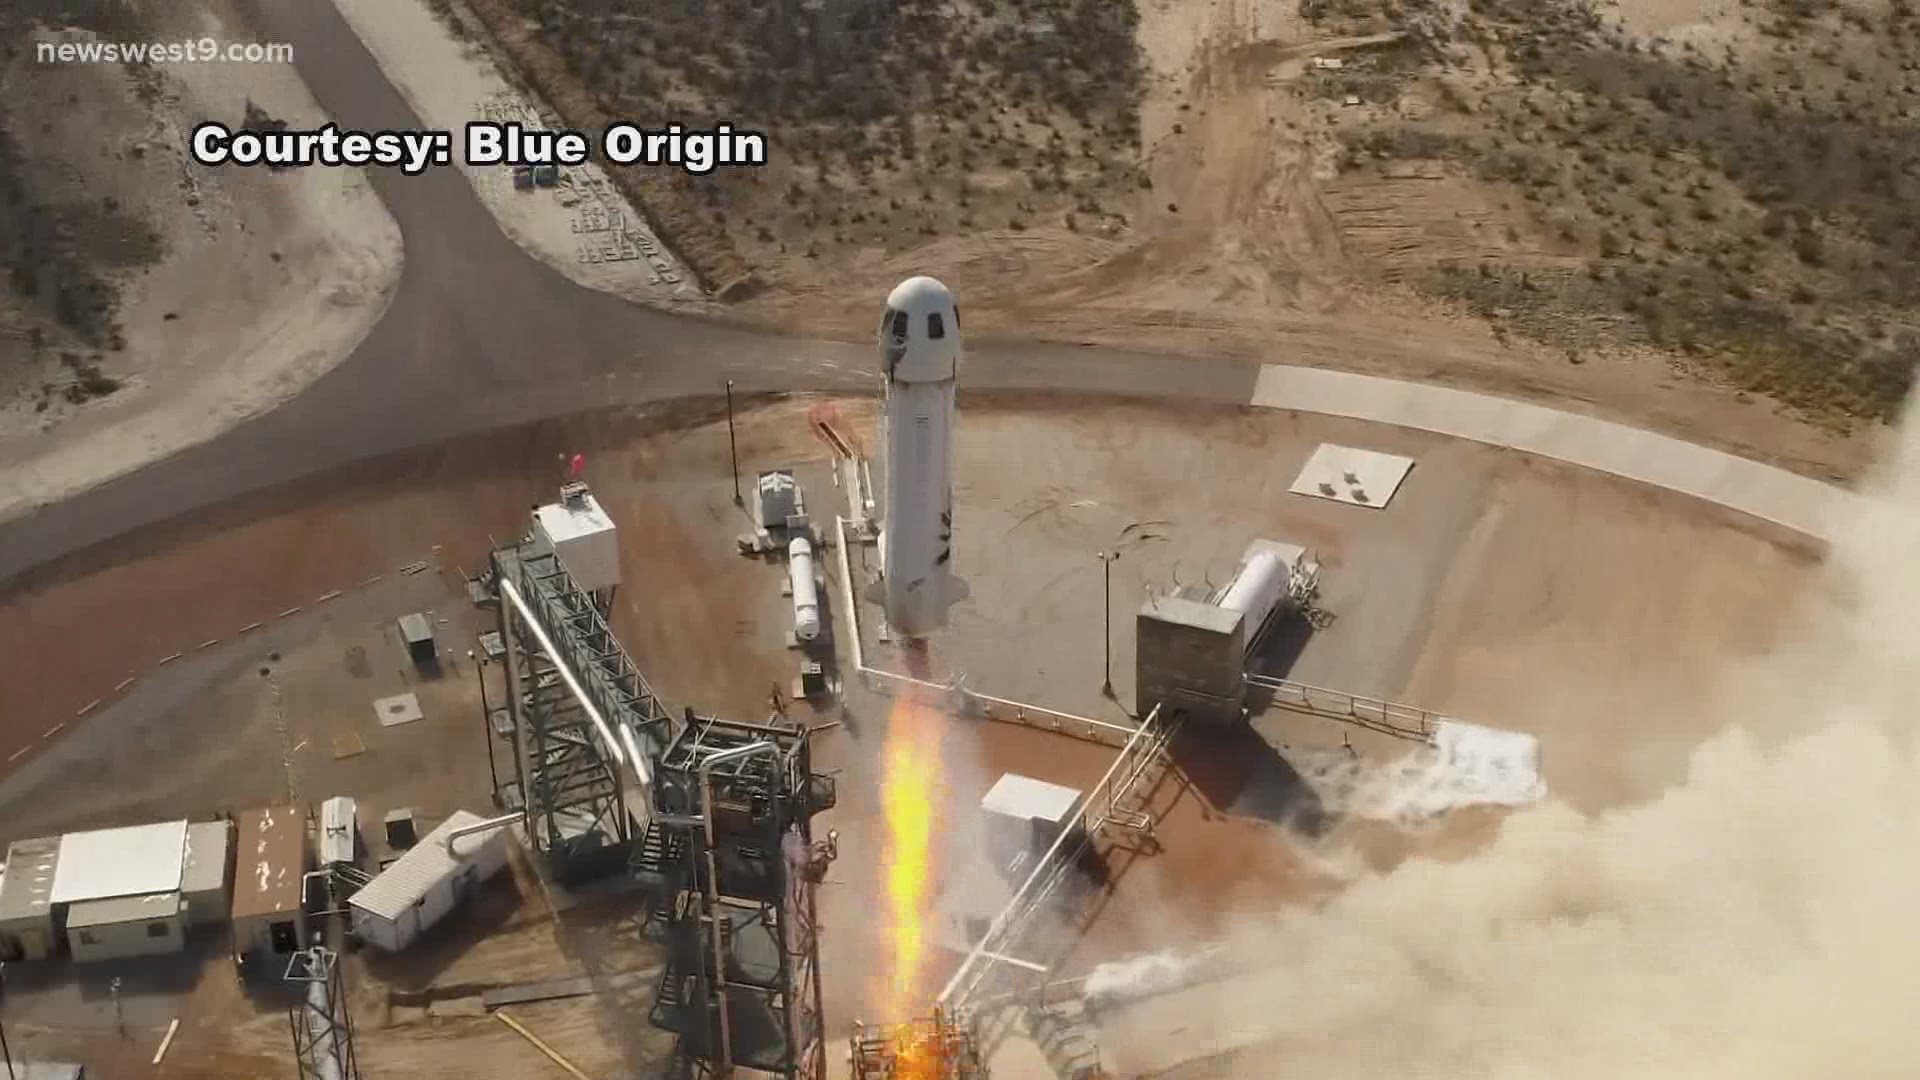 Liftoff is targeted for 10 a.m. Thursday morning from Blue Origin's launch site near Van Horn